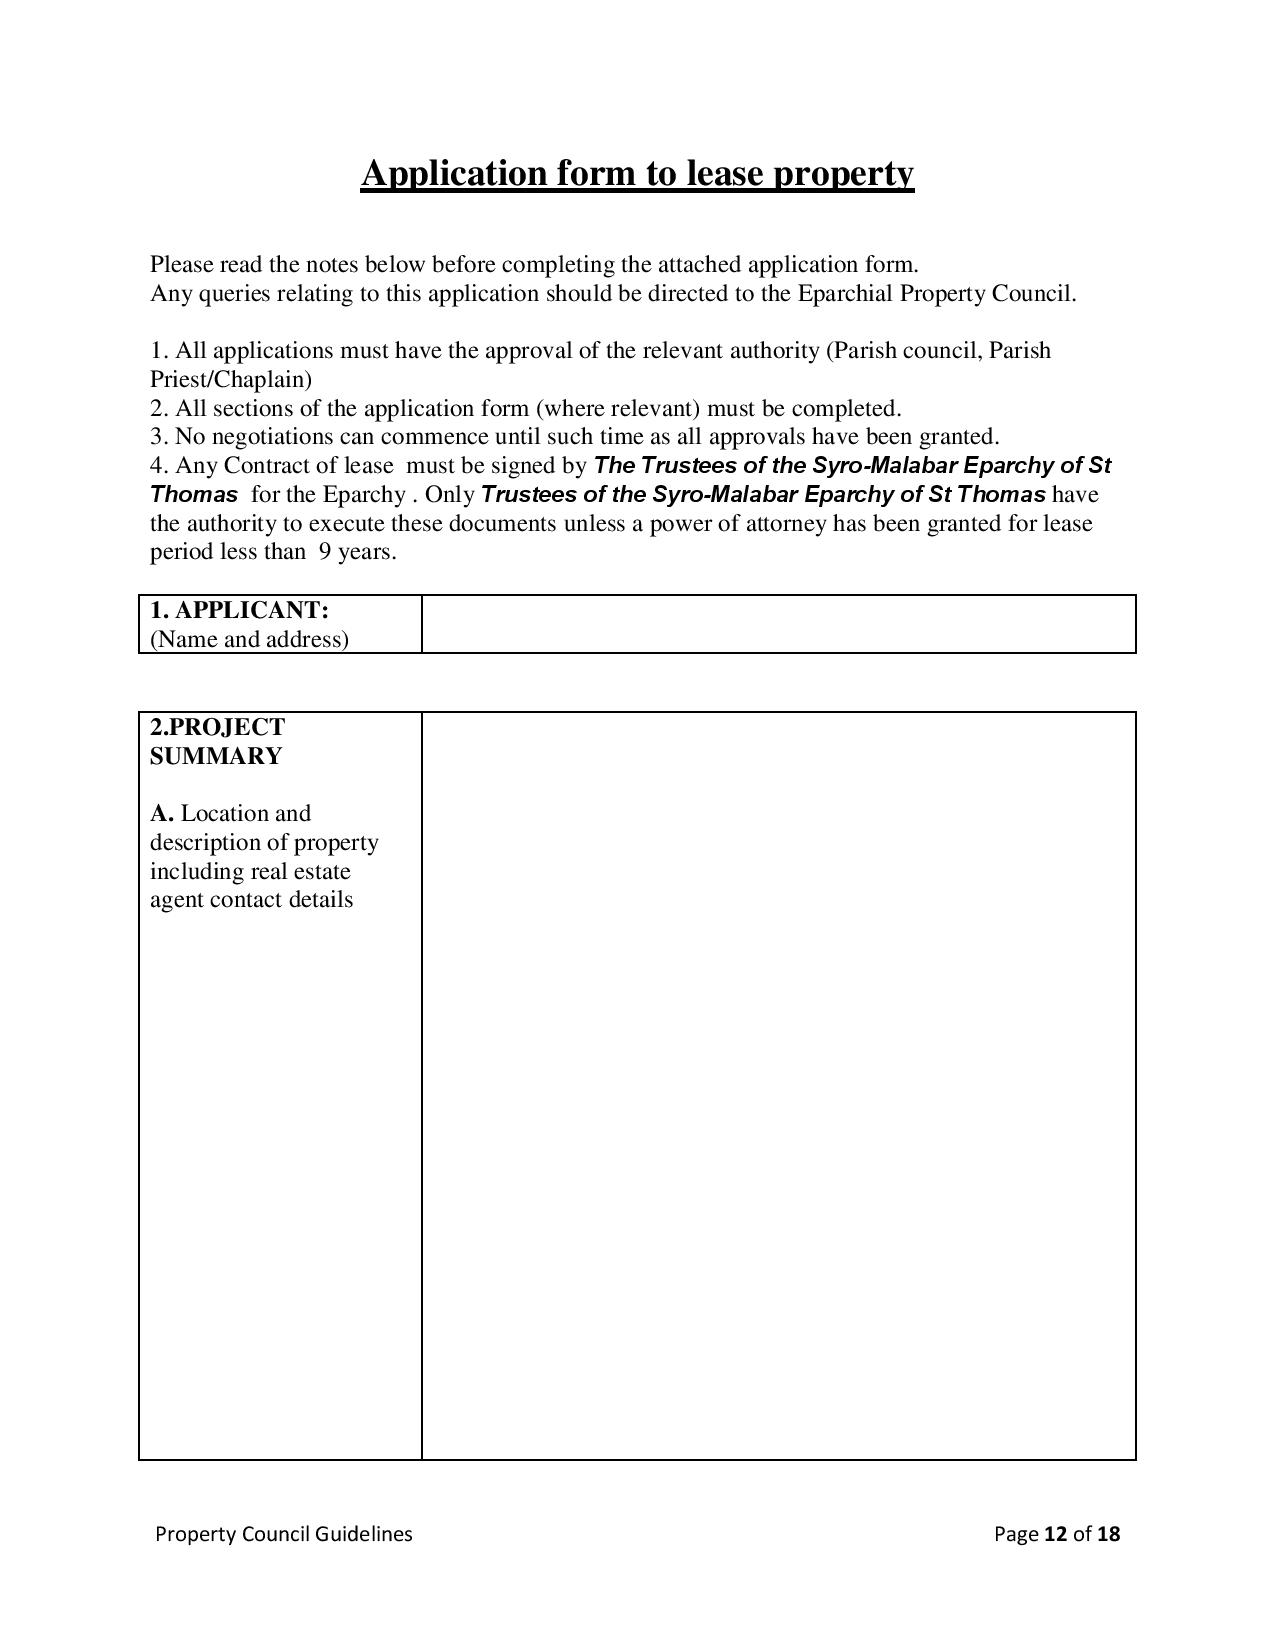 property-council-guidlines-v2-4-page-012